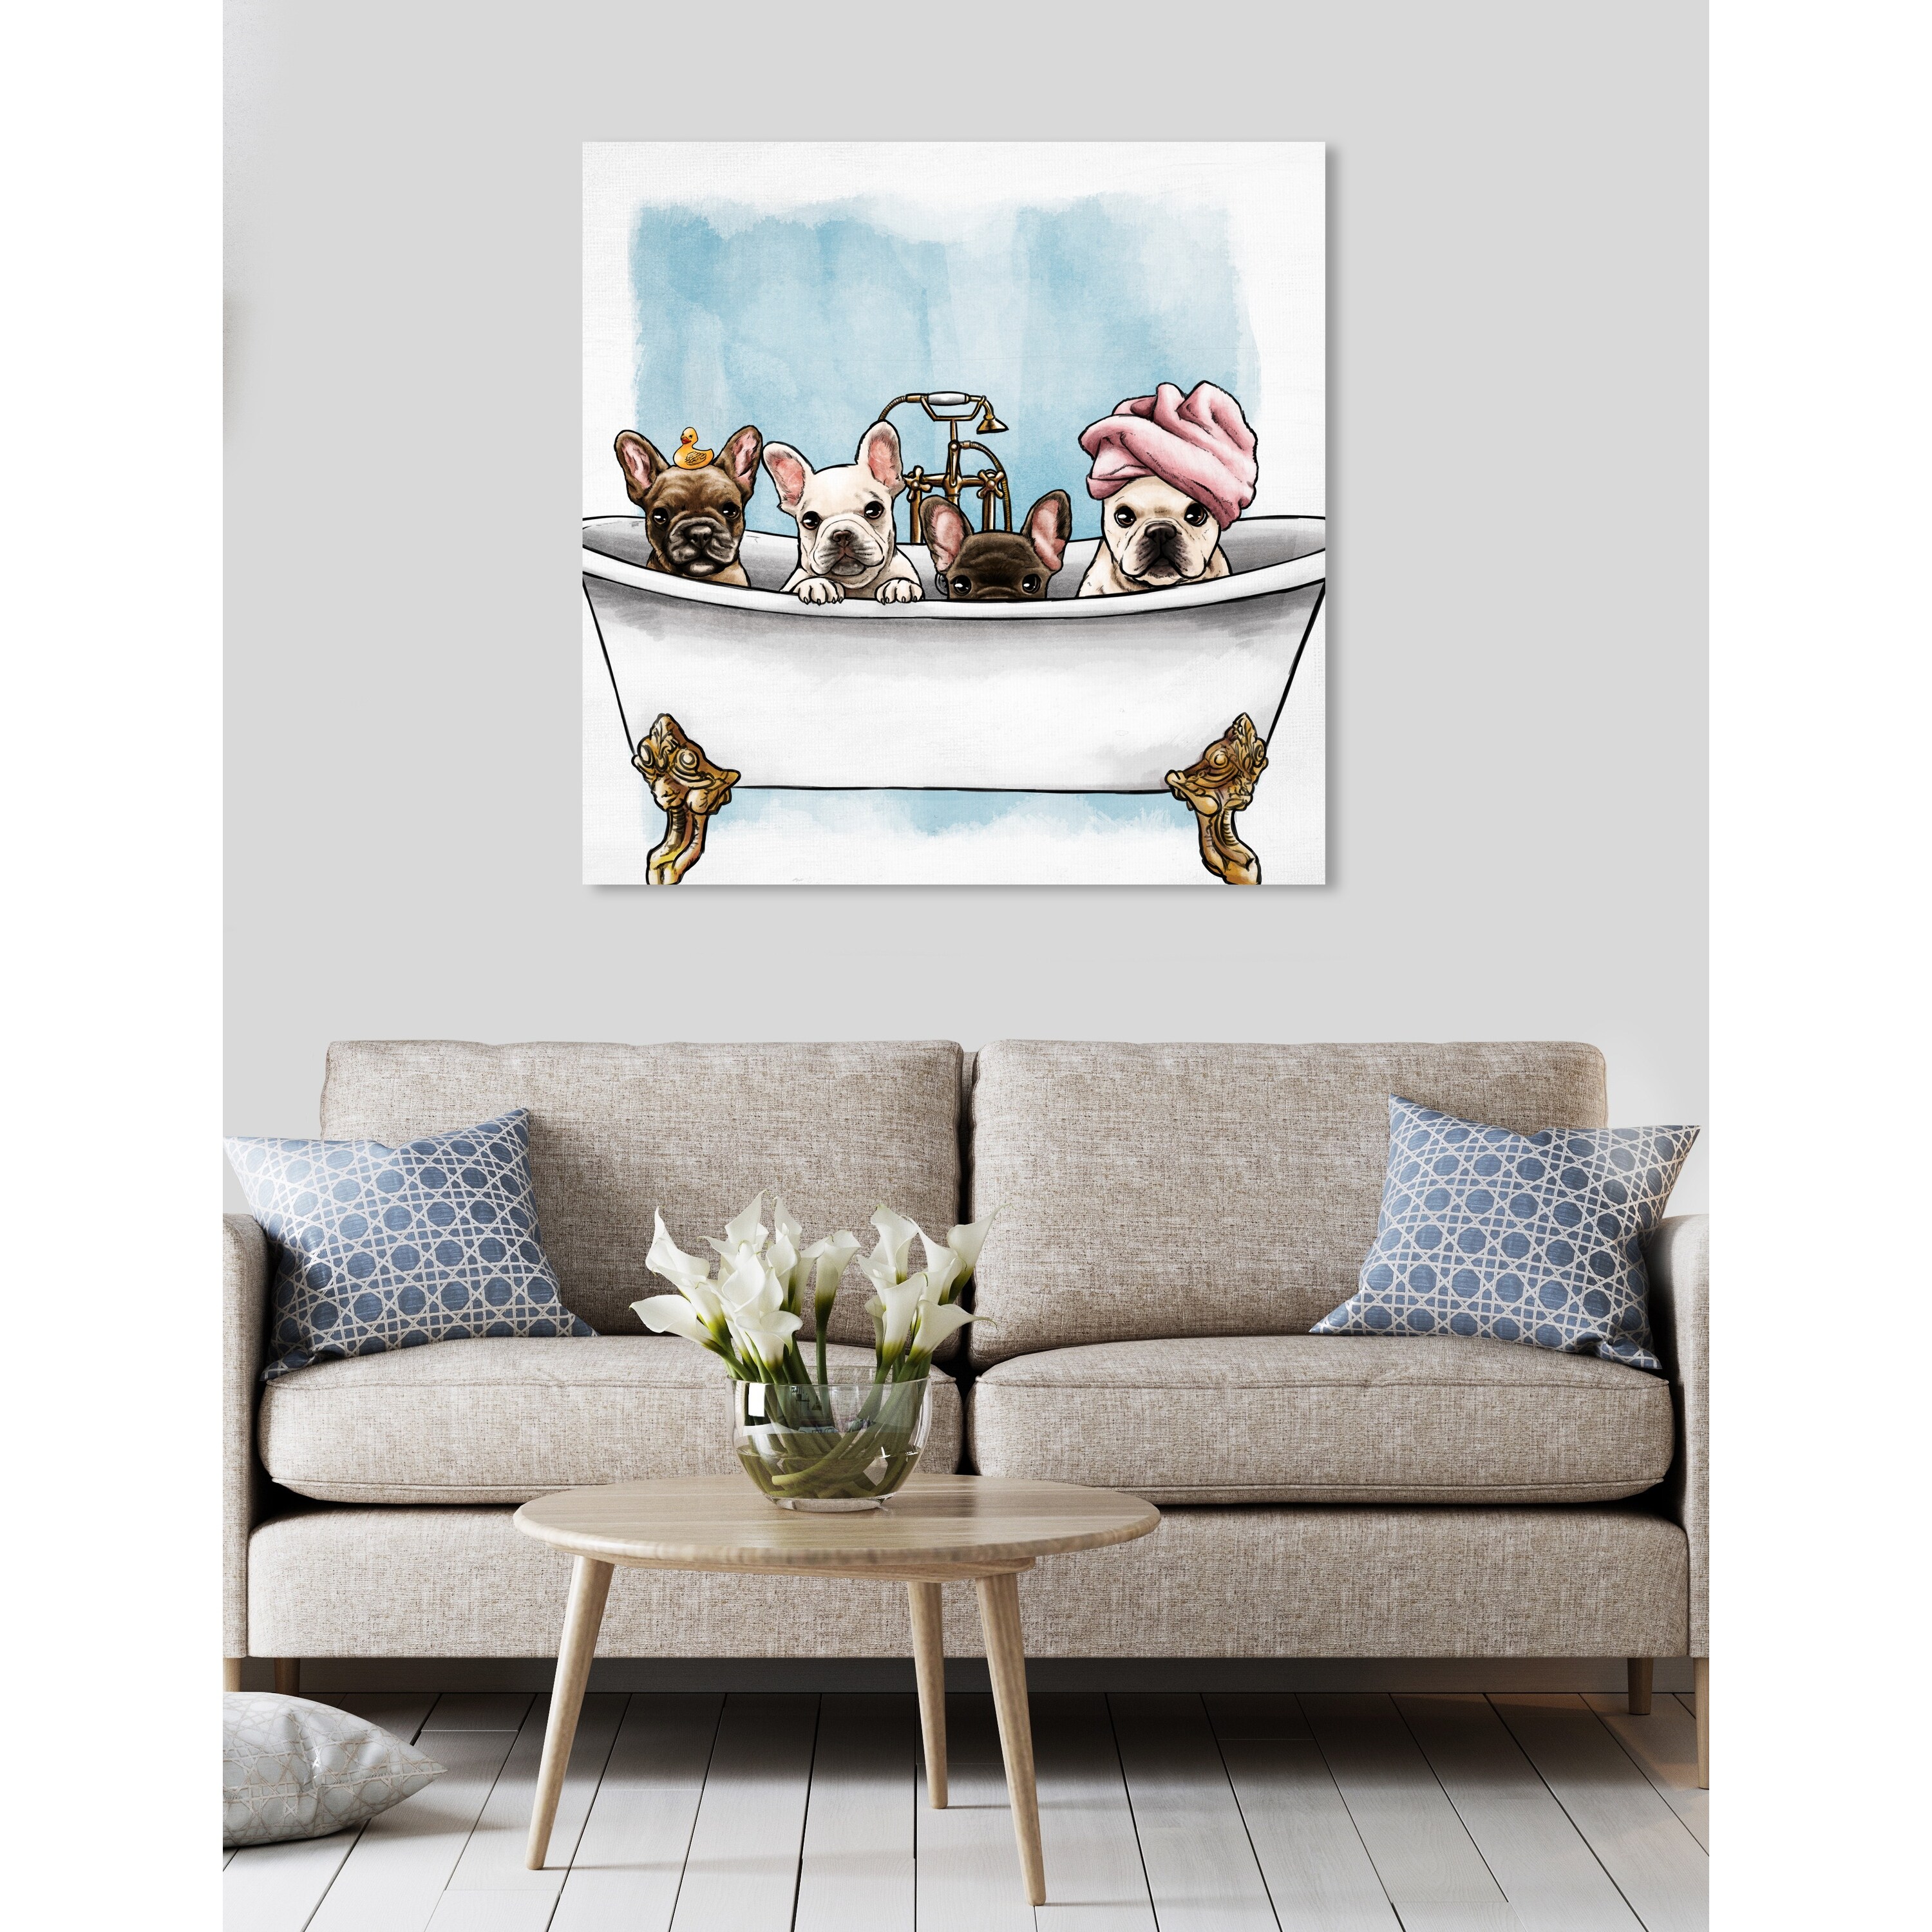 Oliver Gal 'Frenchies in The Tub' Animals Wall Art Canvas Print 